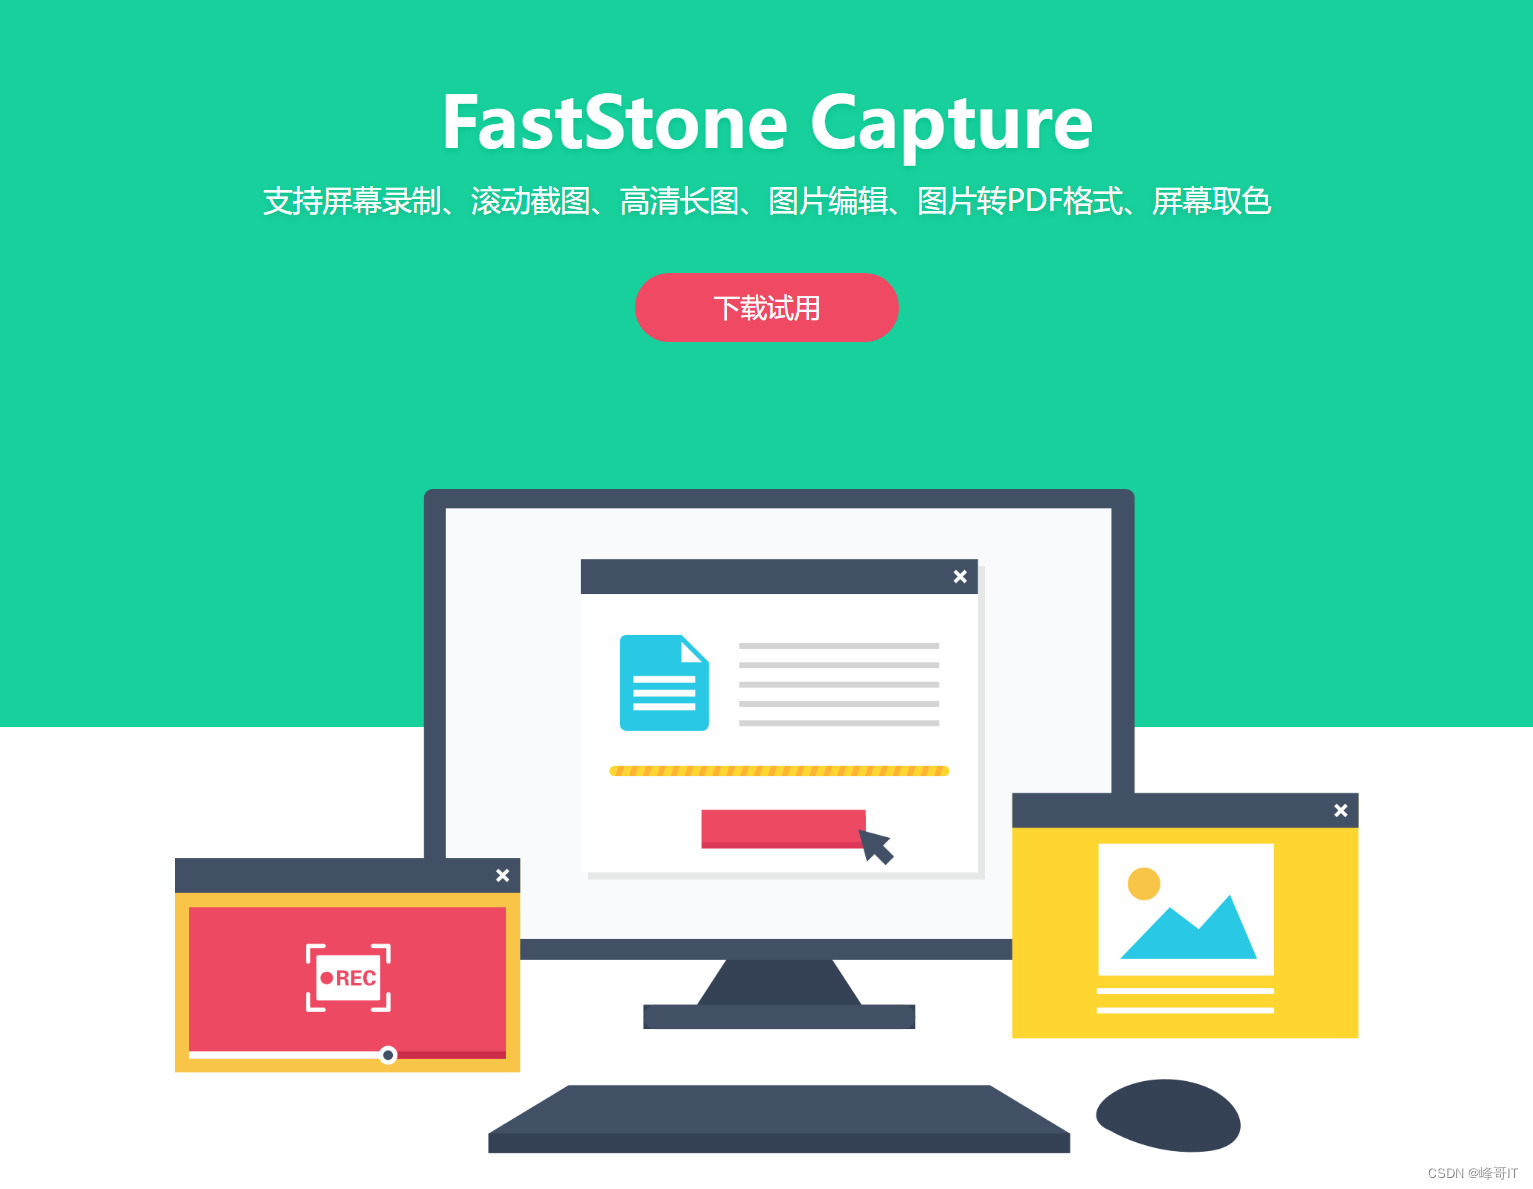 instal the new for apple FastStone Capture 10.3